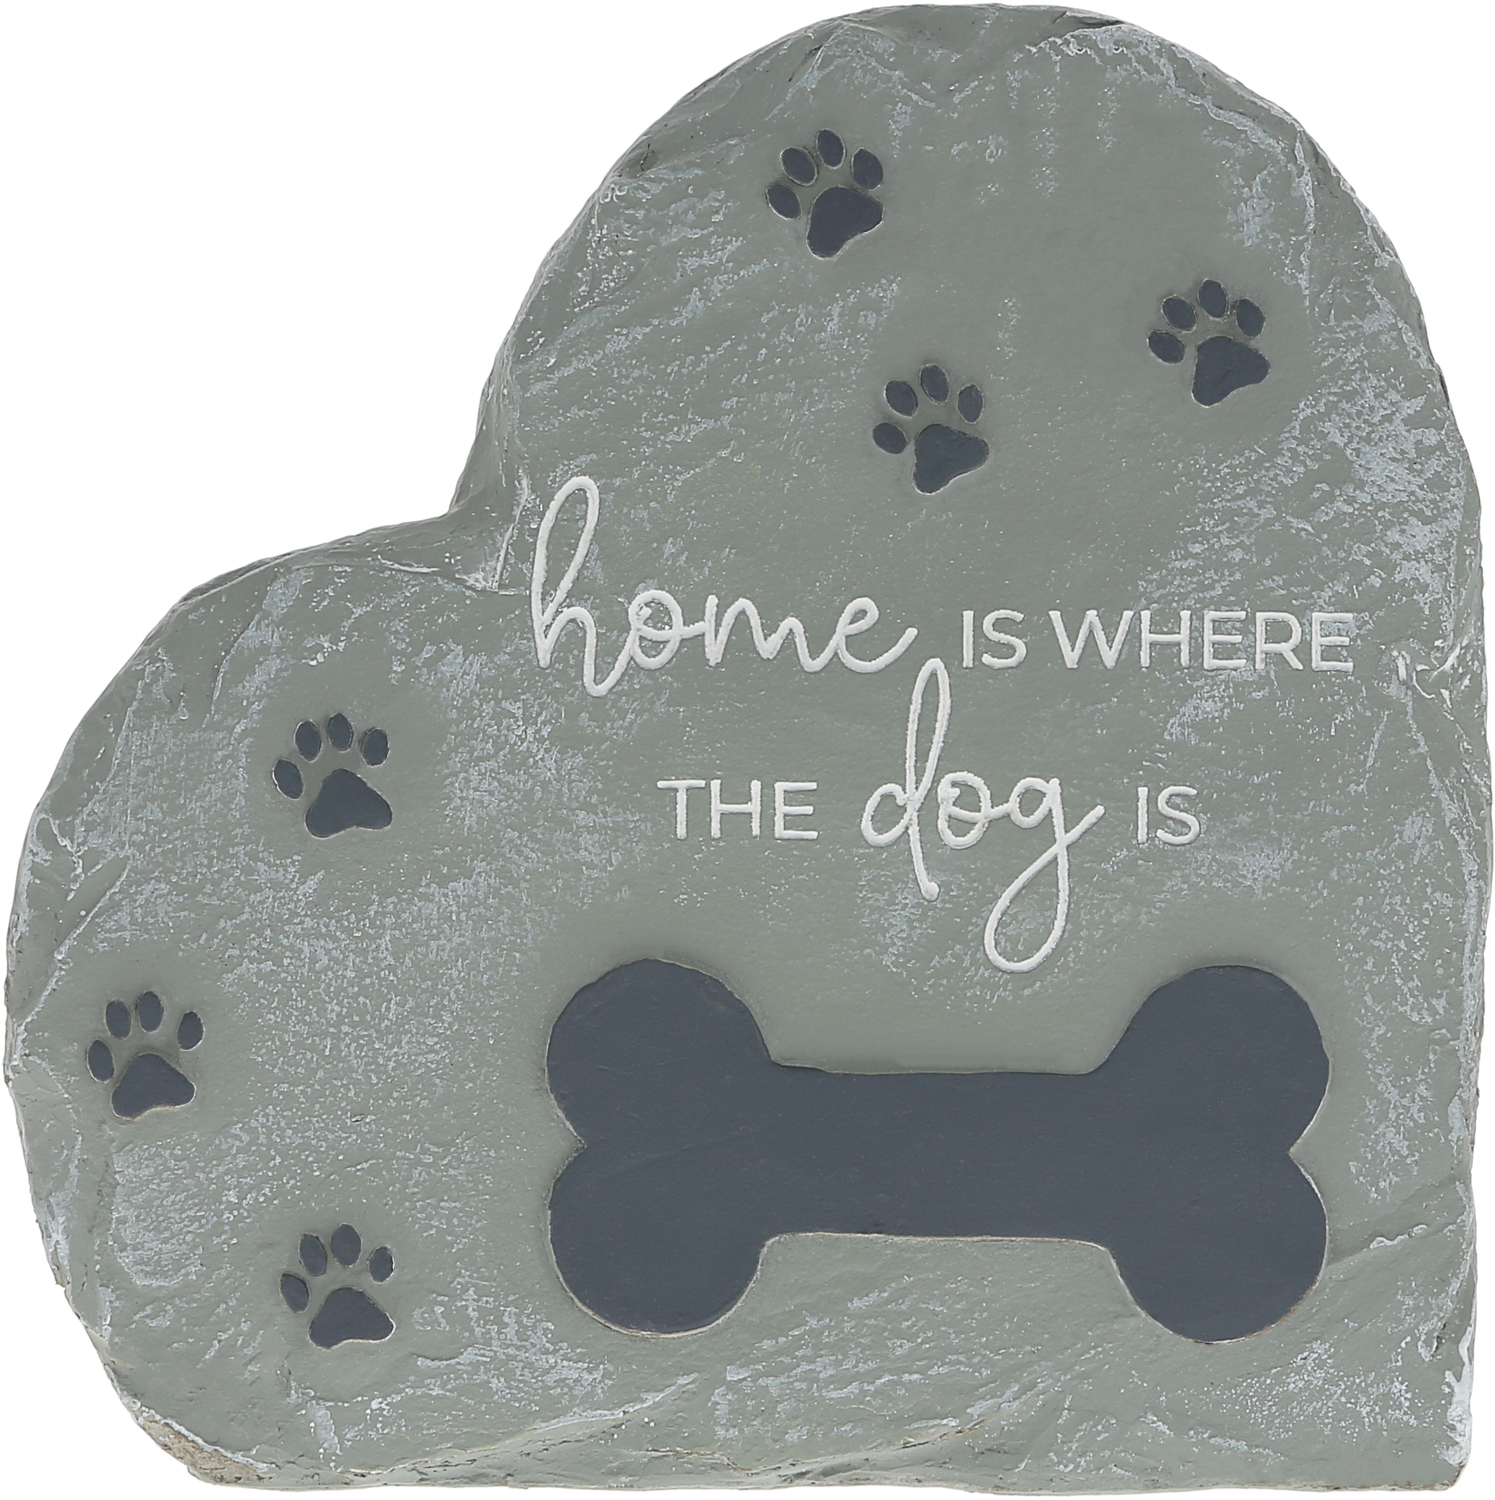 Where The Dog Is by Furever Pawsome - Where The Dog Is - 6" Garden Stone